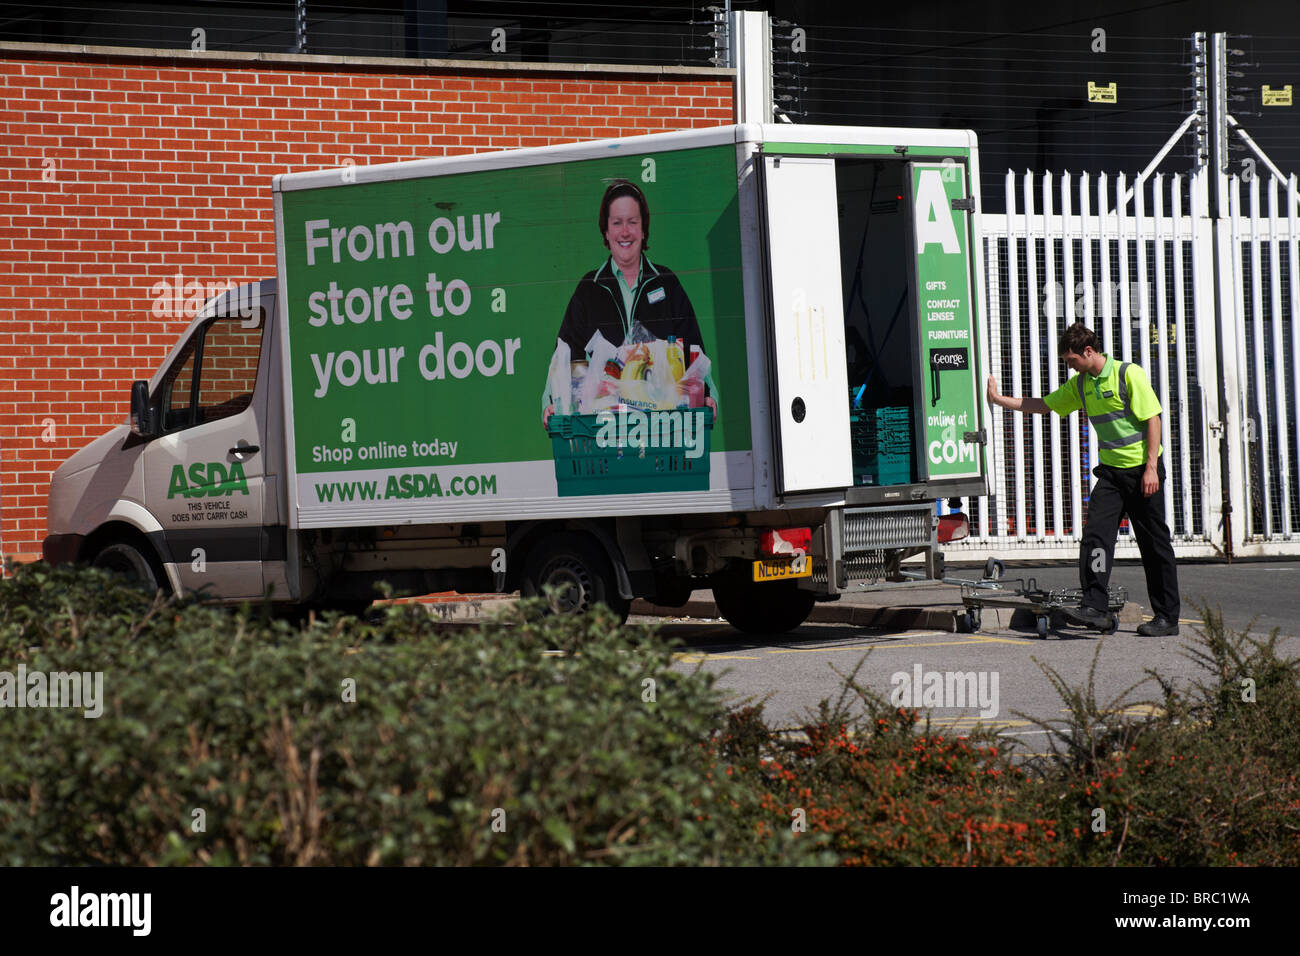 Getting the Asda van ready for home deliveries at Poole, Dorset UK in August - from our store to your door shop online today Stock Photo